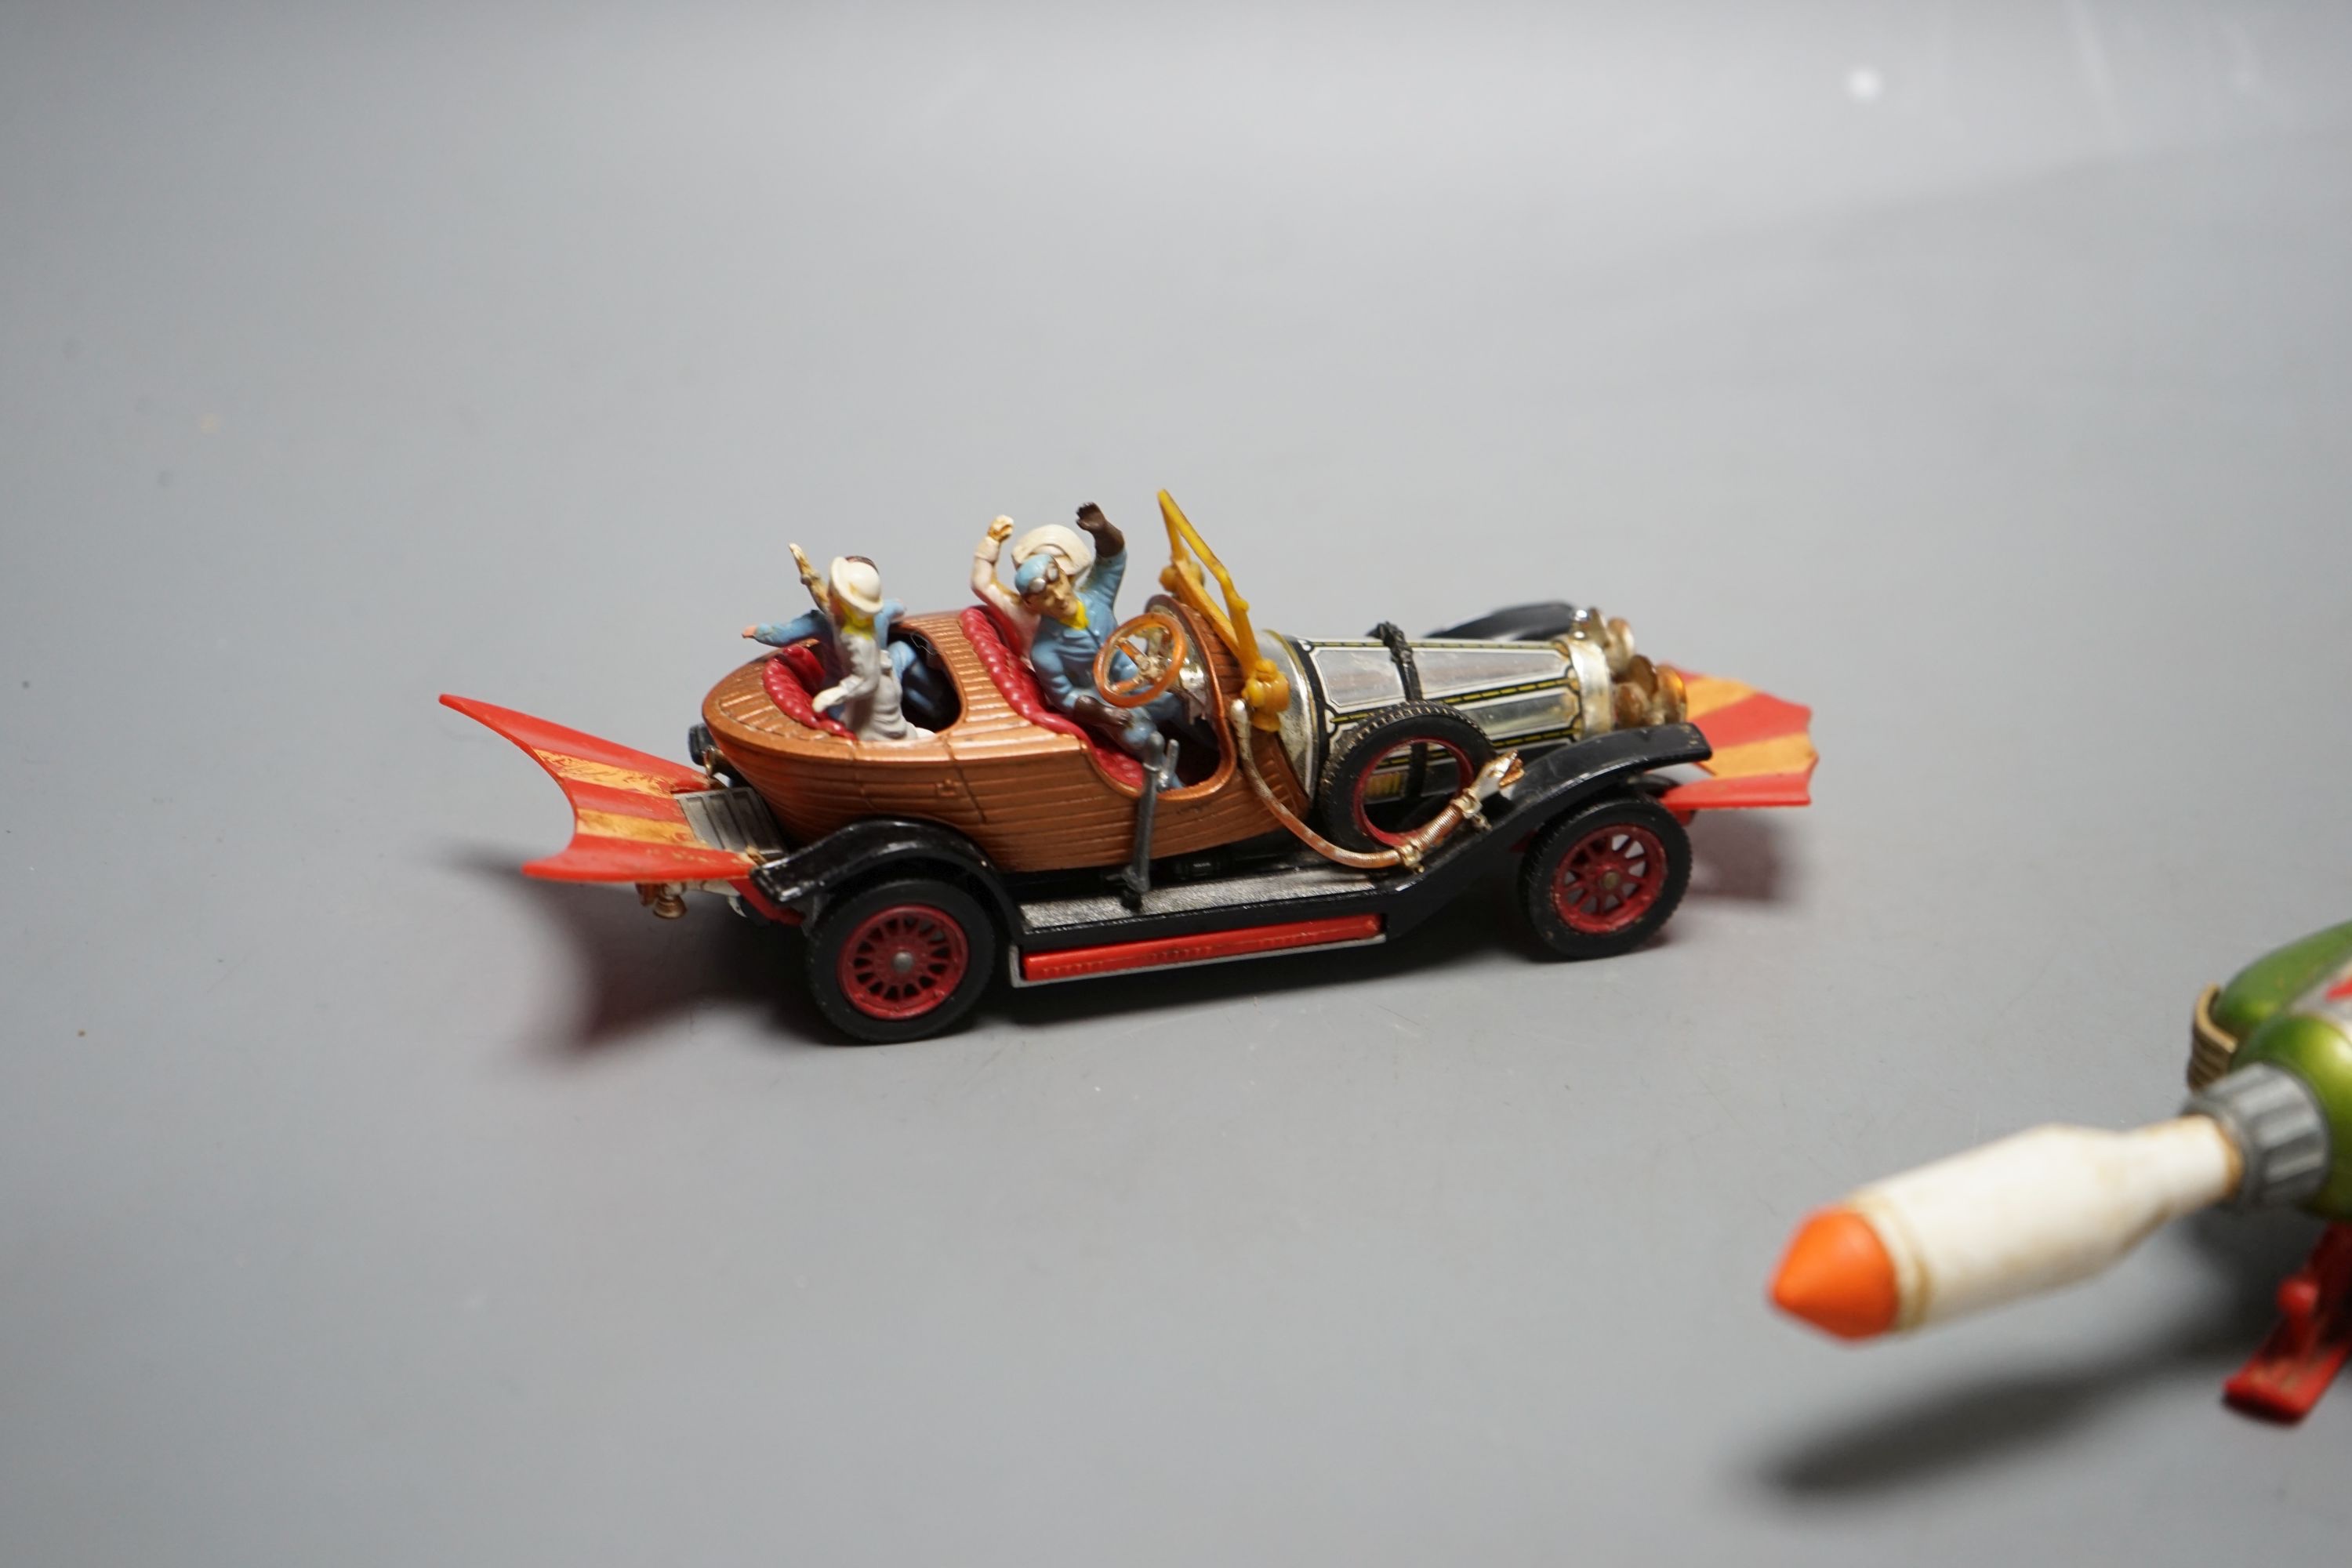 Vintage Dinky Toy “Chitty Chitty Bang Bang” with figures and “UFO Interceptor”, 19.5 cms long.